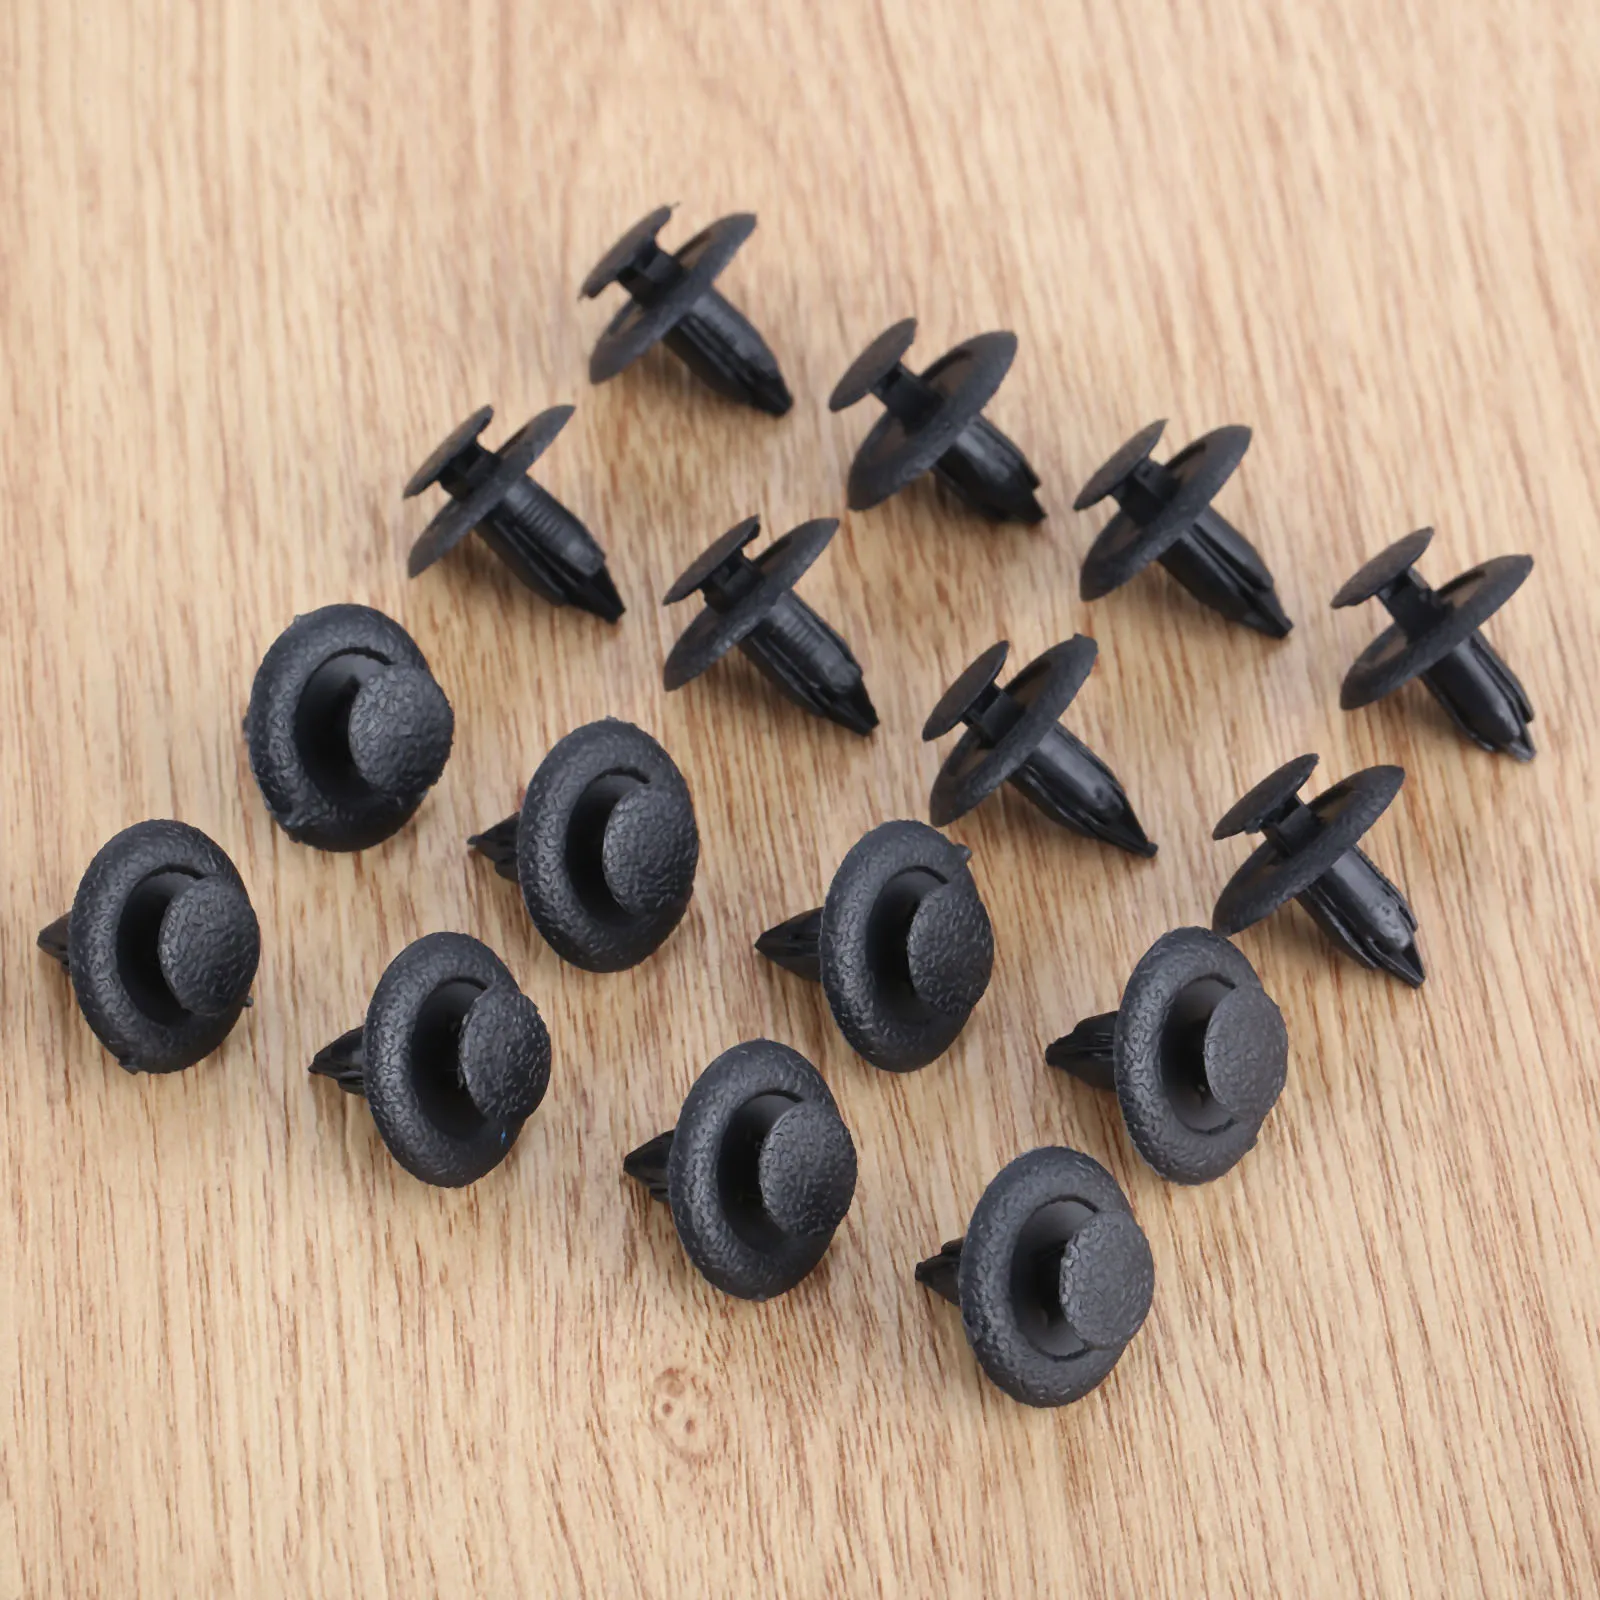 50Pcs Auto Fastener 6mm Hole Car Trunk Ceiling Fixed Clamp Push Type Interior Clips For Mazda 323 Family HAPPIN M3 M6 B70 B50